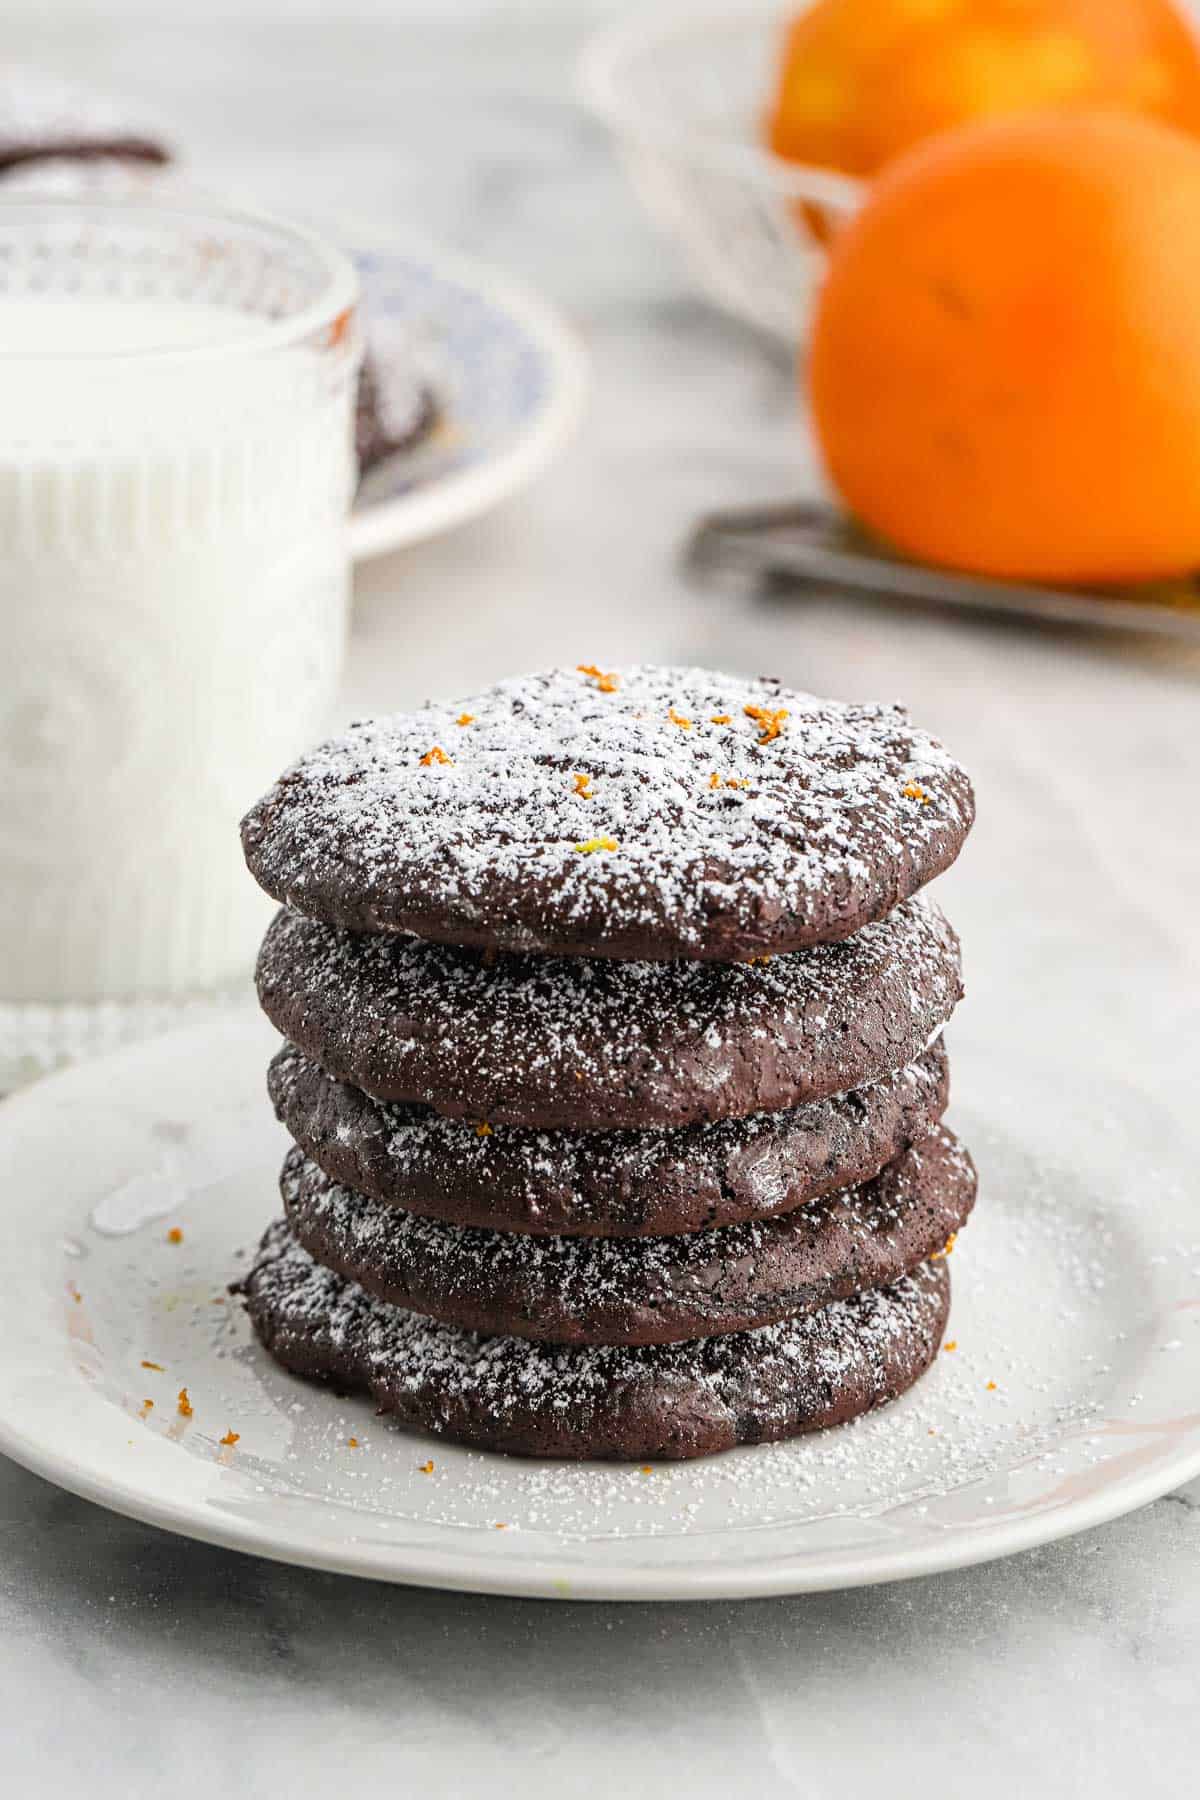 A stack of Flourless Chocolate Orange Cookies displayed on a white plate with oranges slices surrounding it